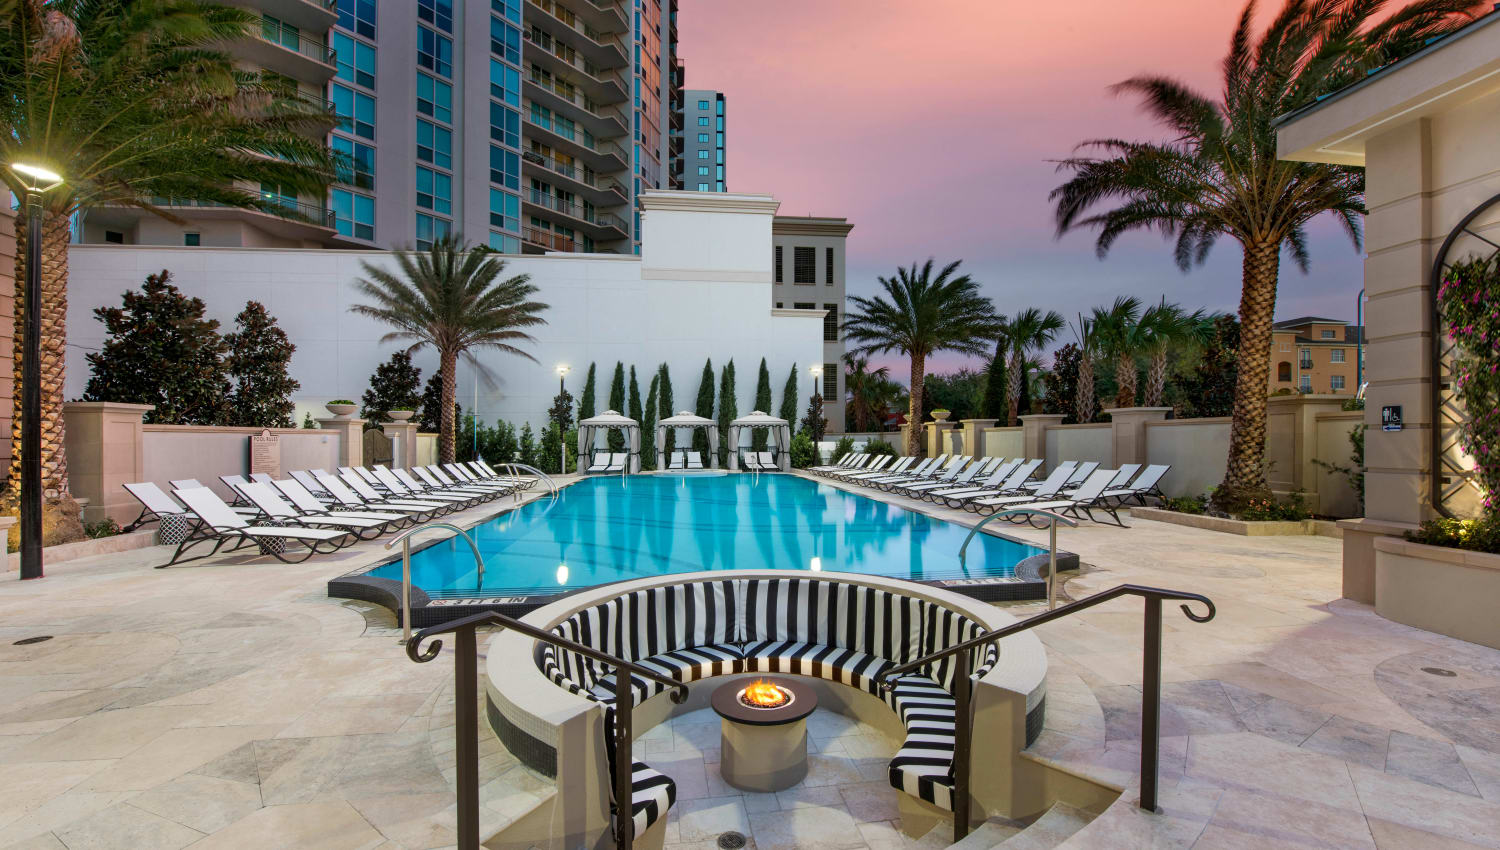 Fire pit and pool area at twilight at Olympus Harbour Island in Tampa, Floridac